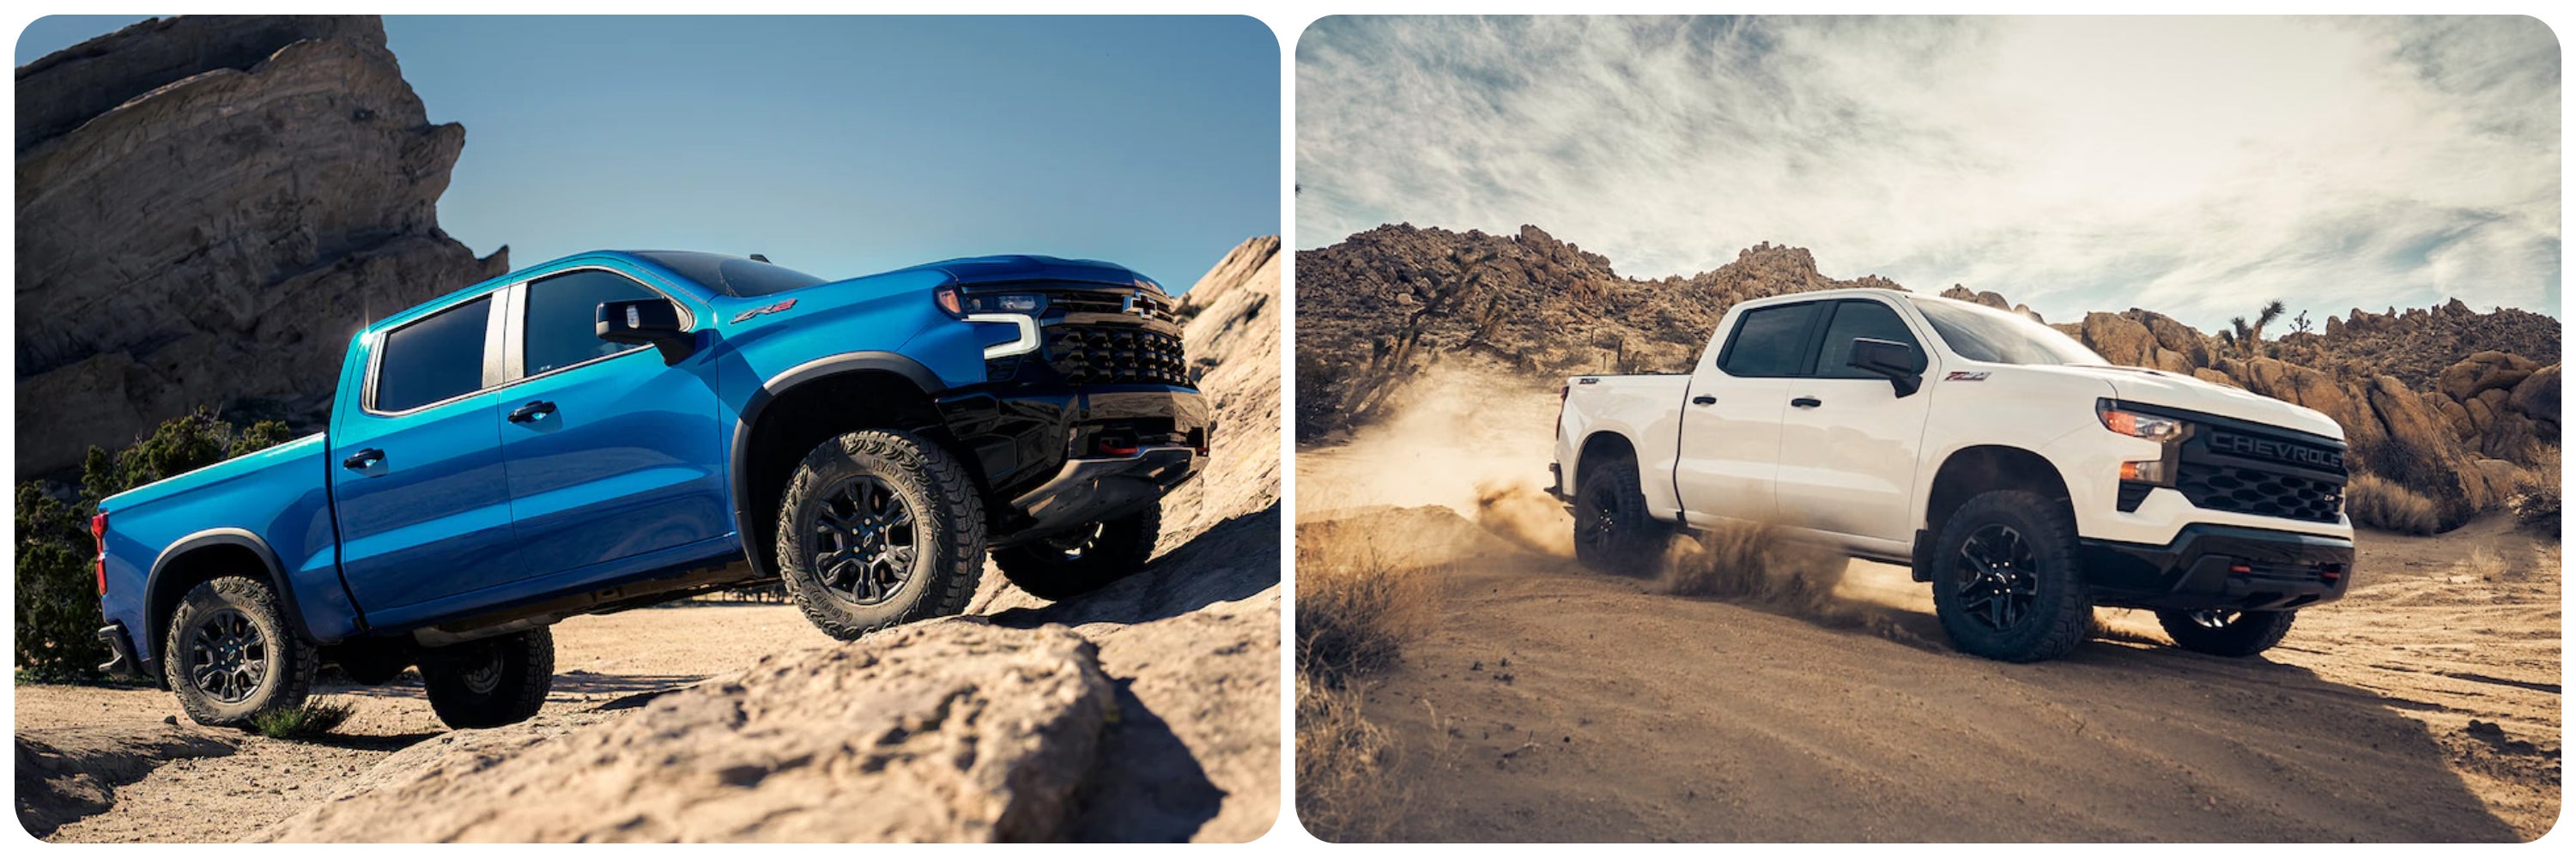 On the left a blue 2023 Ford Super Duty climbs rocky terrain, on the right a white 2023 Chevy Silverado drives in the desert.